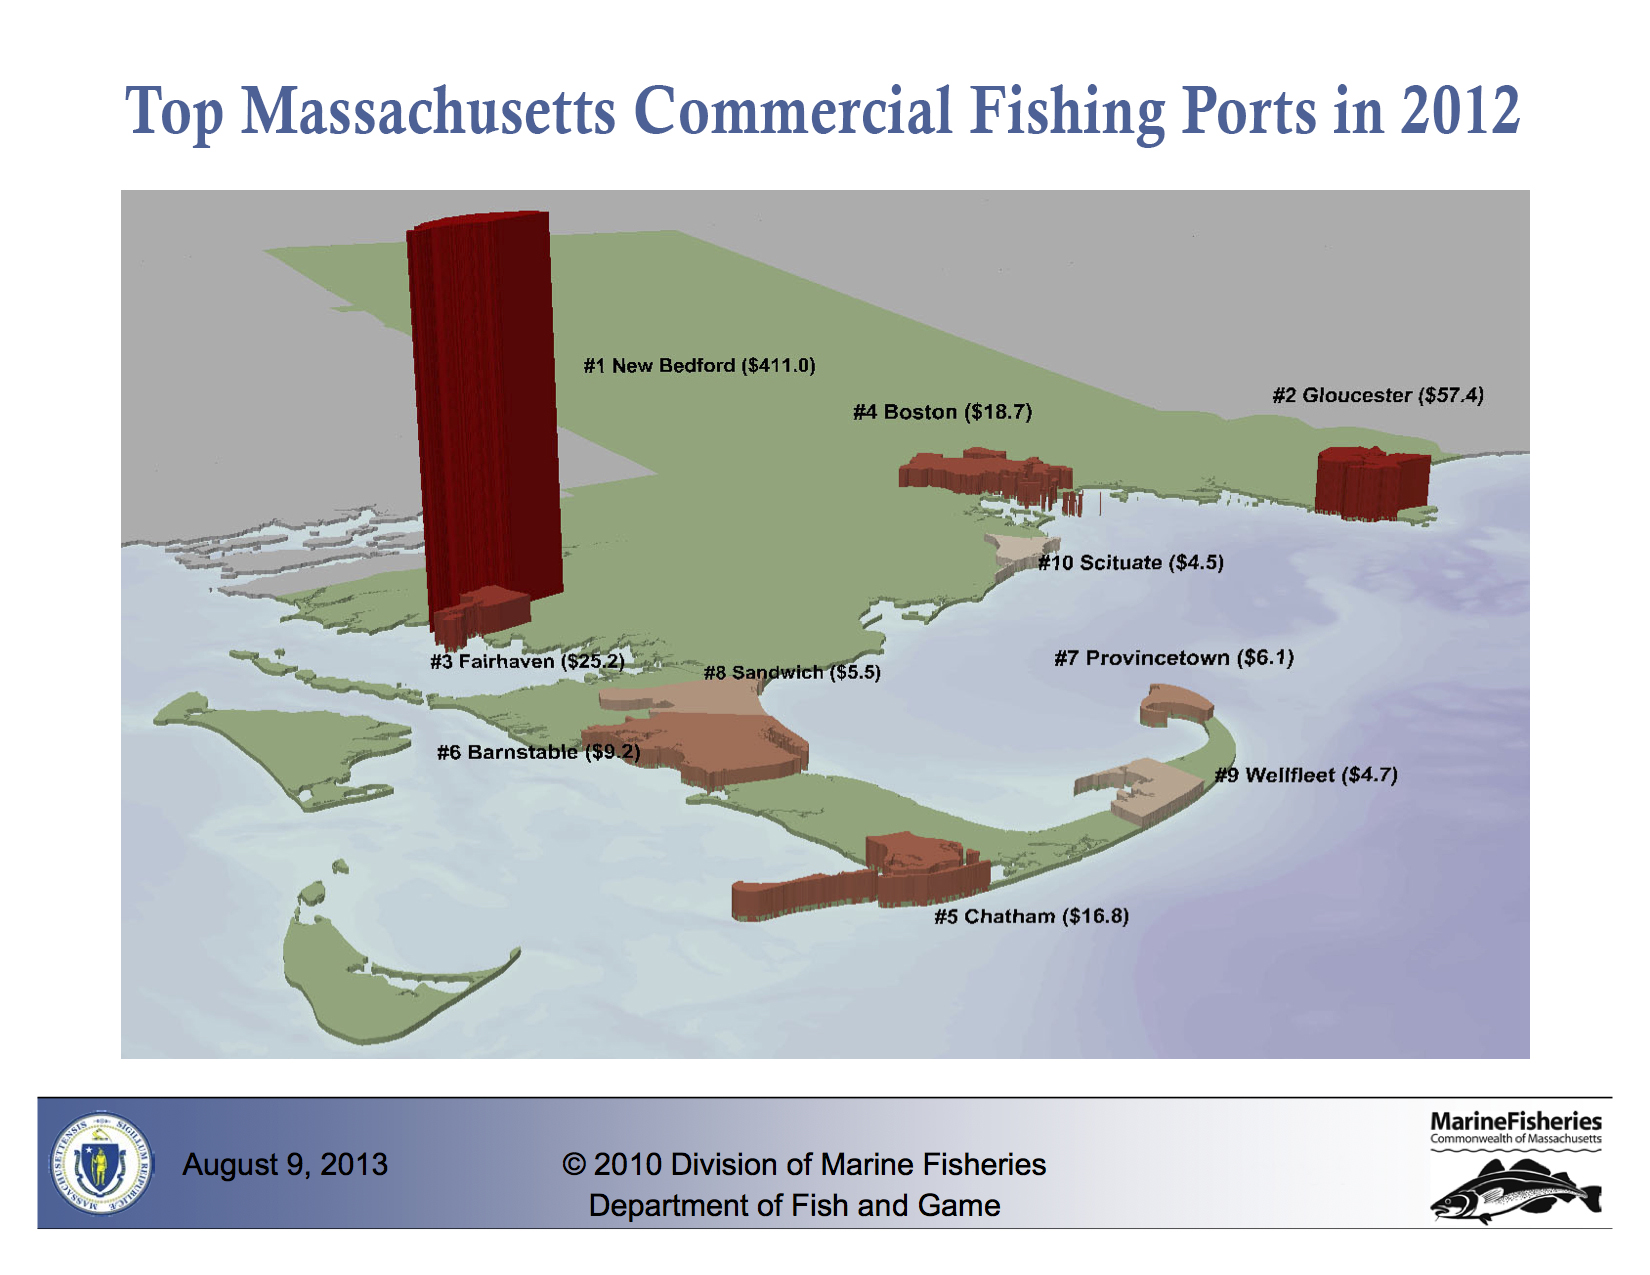 New Bedford, MA is America's most valuable commercial fishing port.